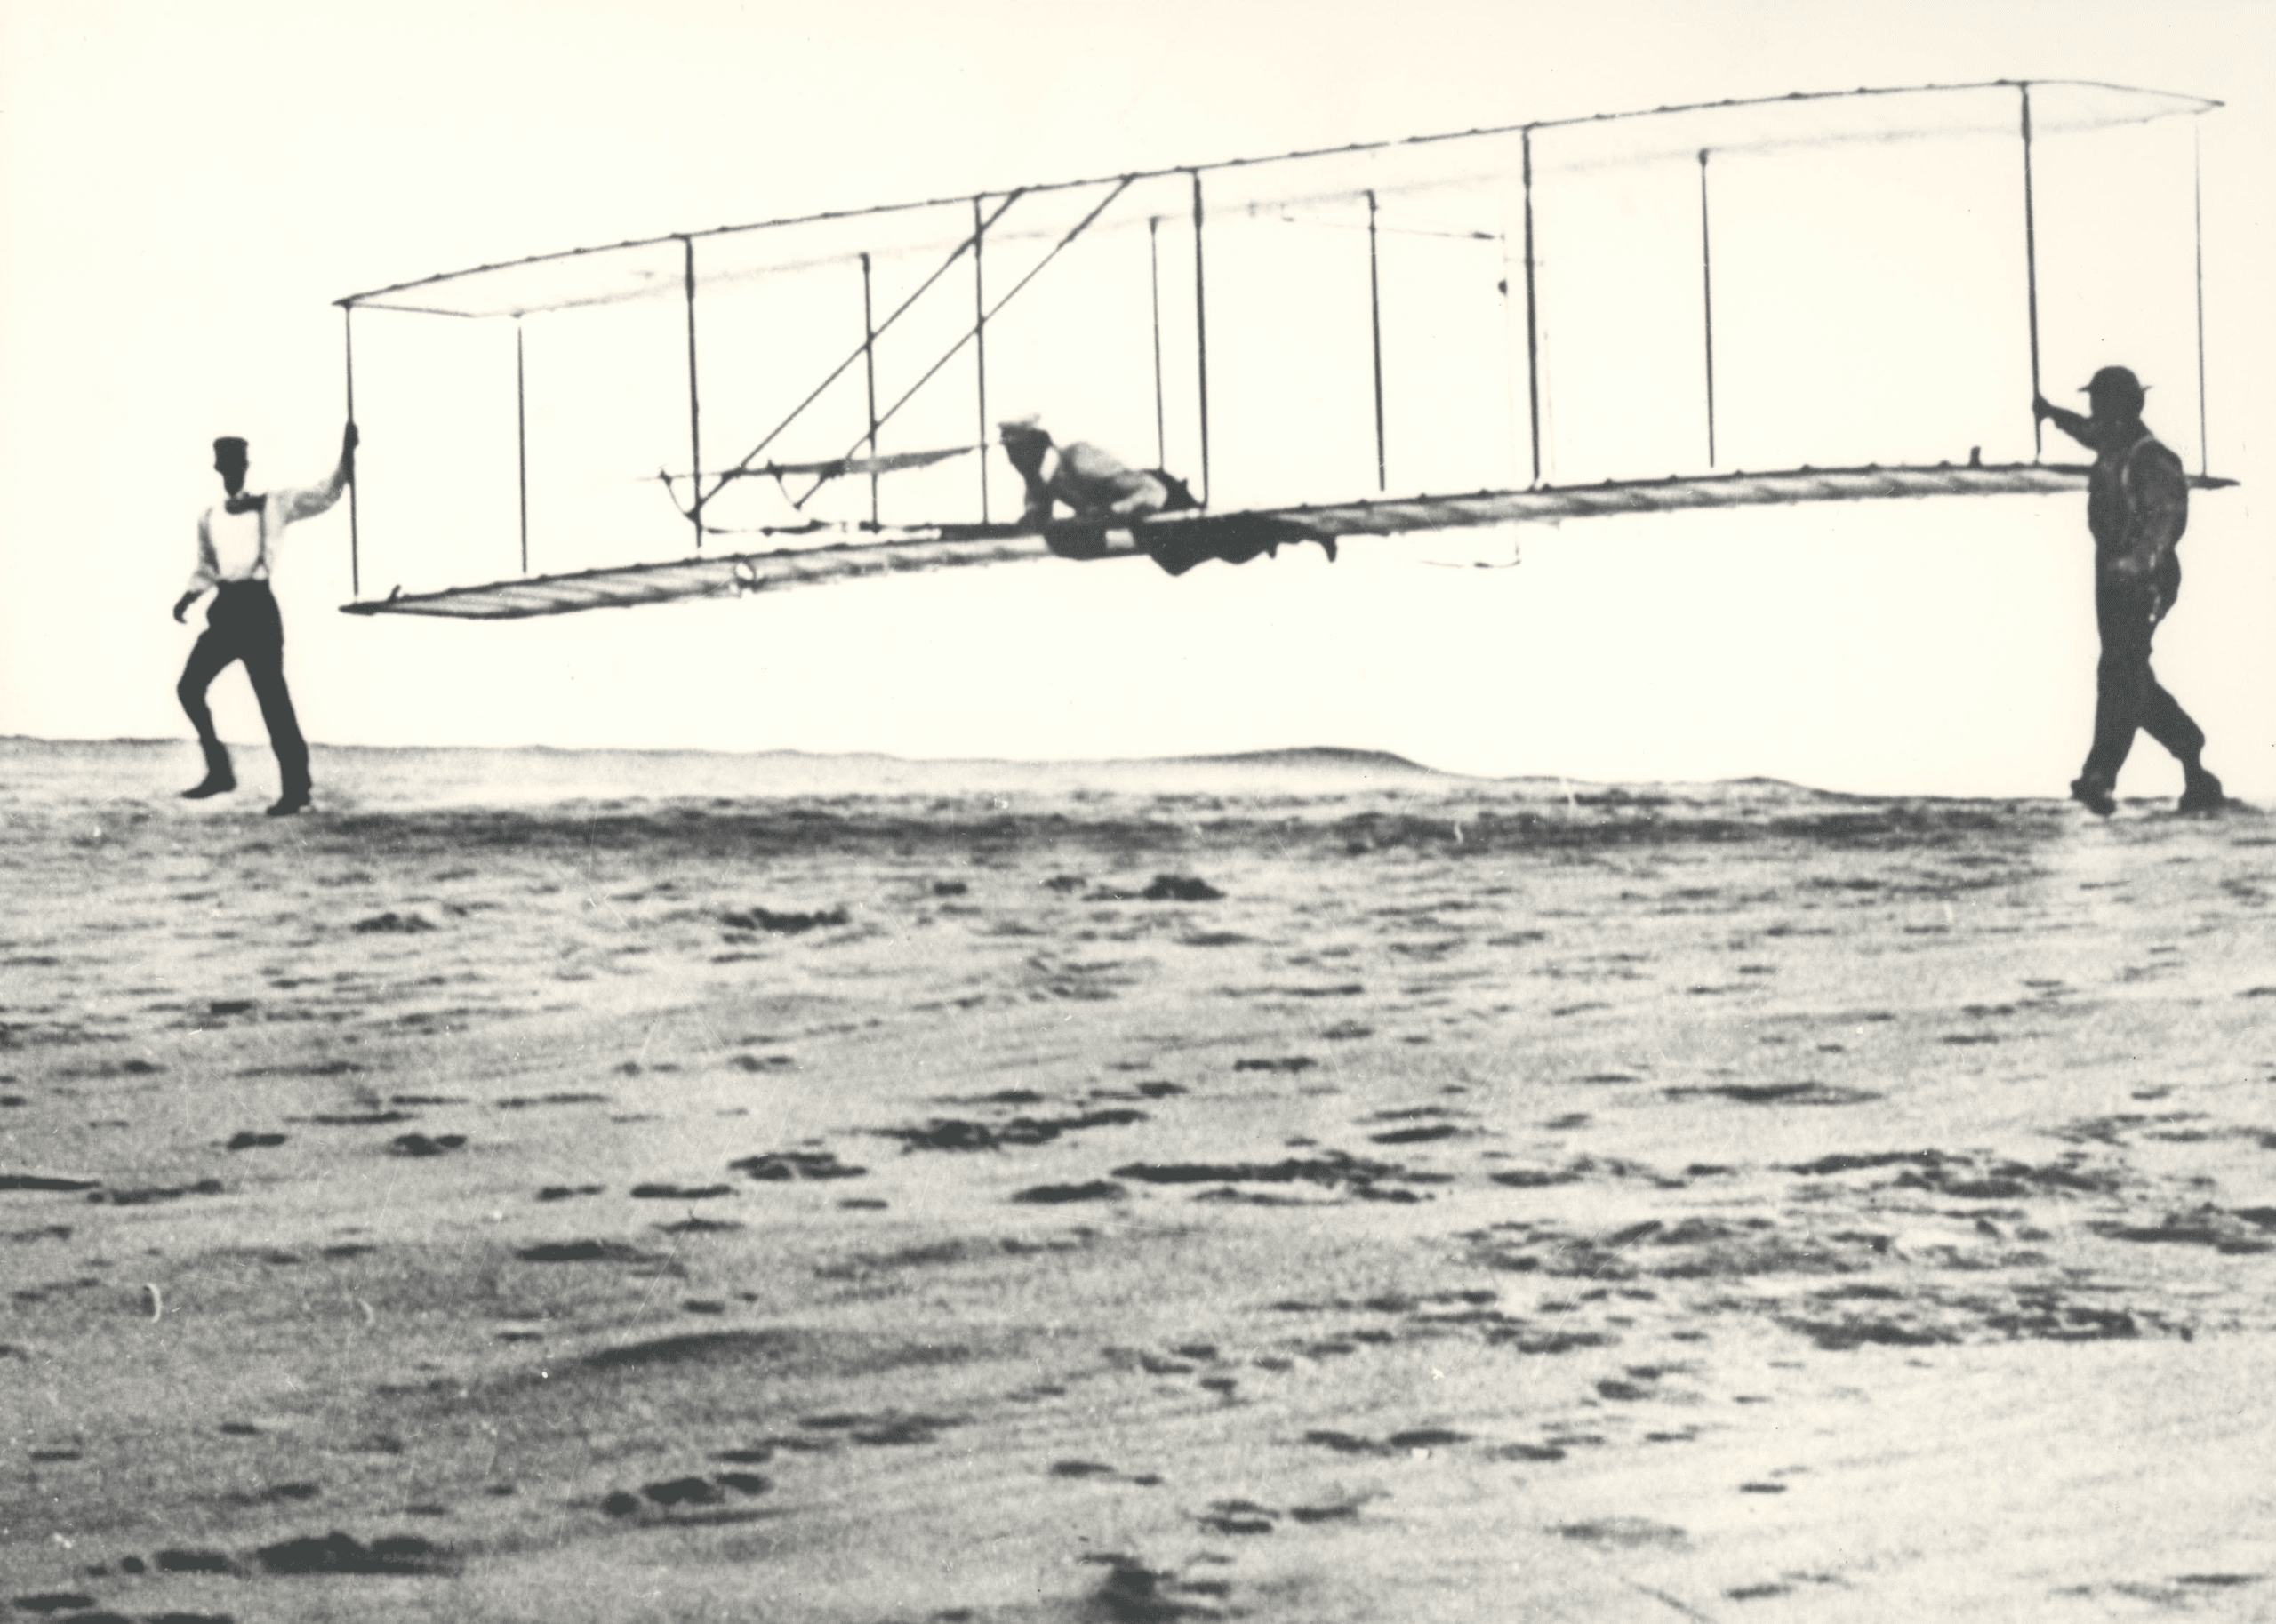 Historic photo of the Wright brothers' third test glider being launched at Kill Devil Hills